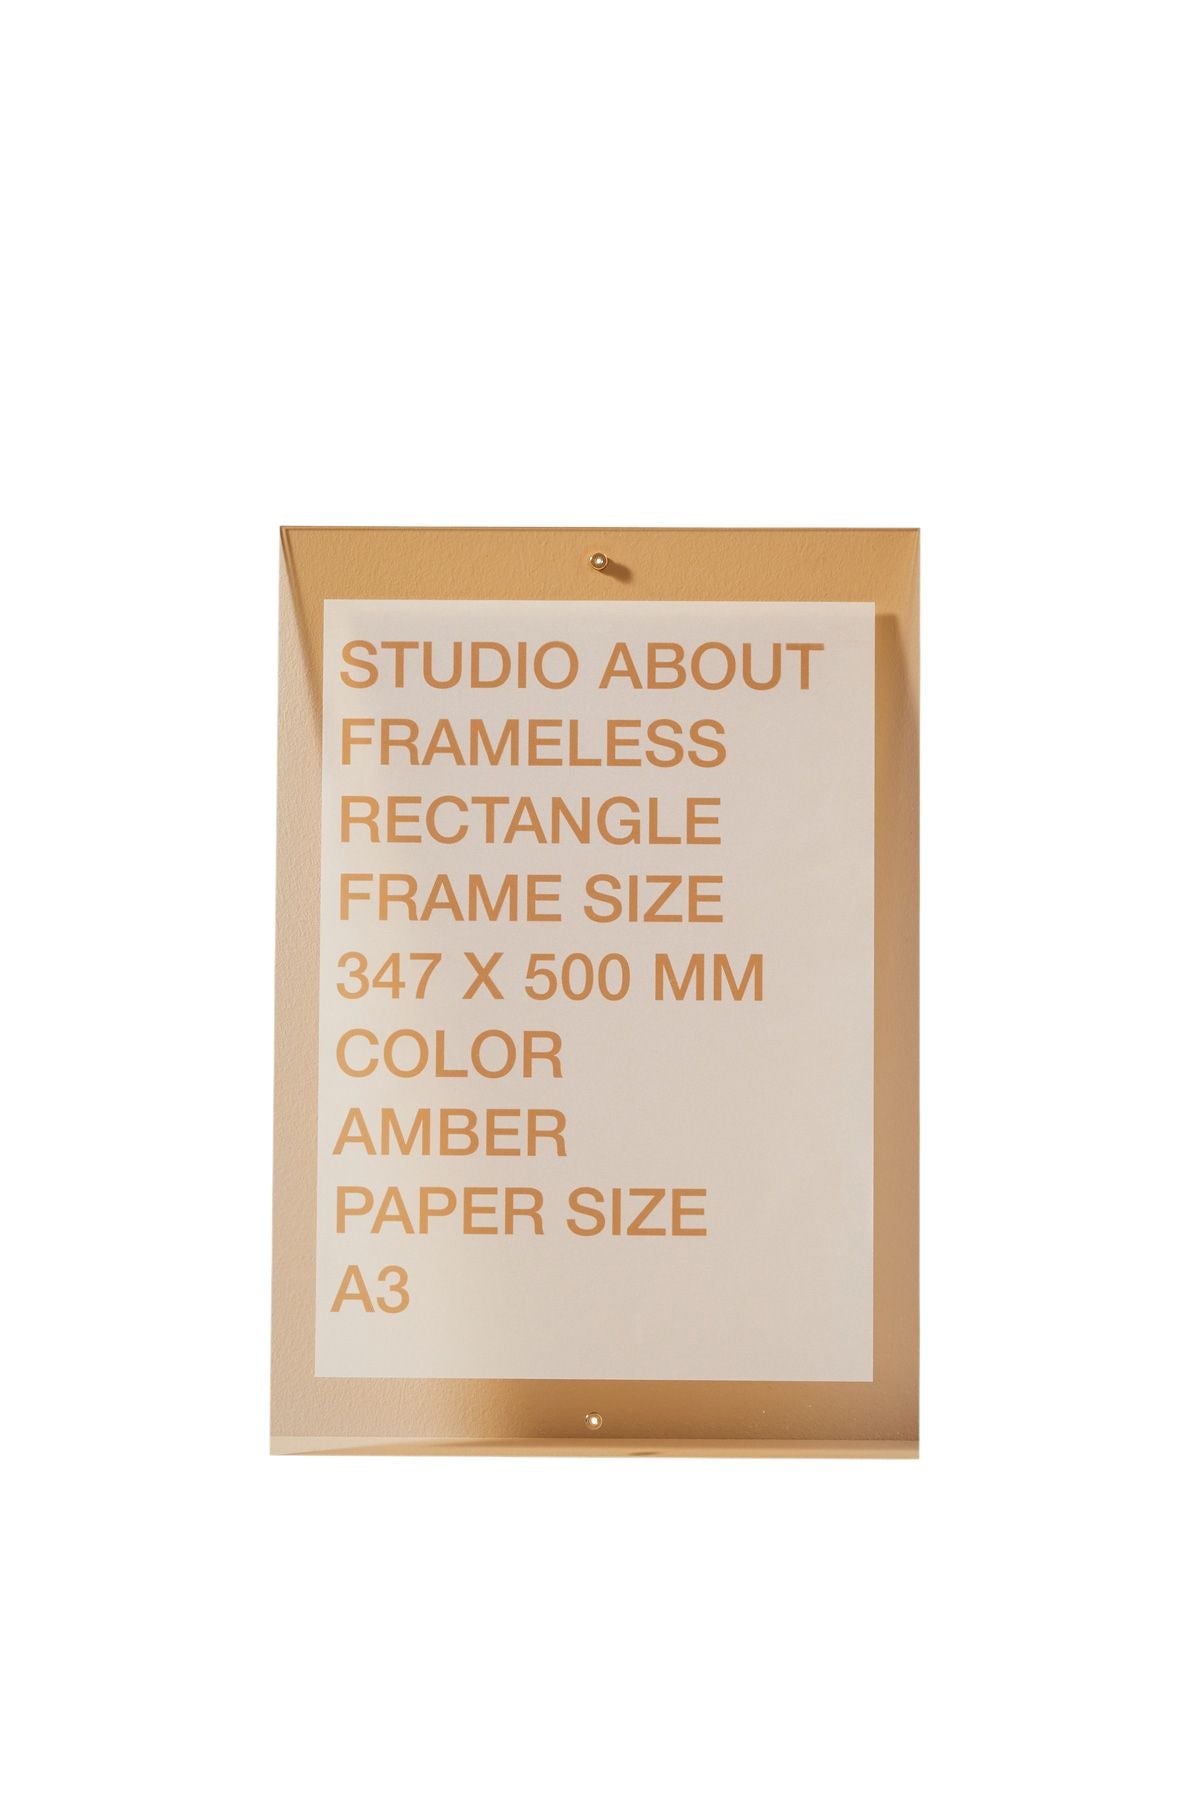 Studio About Frameless Frame A3 Rectangle, Amber